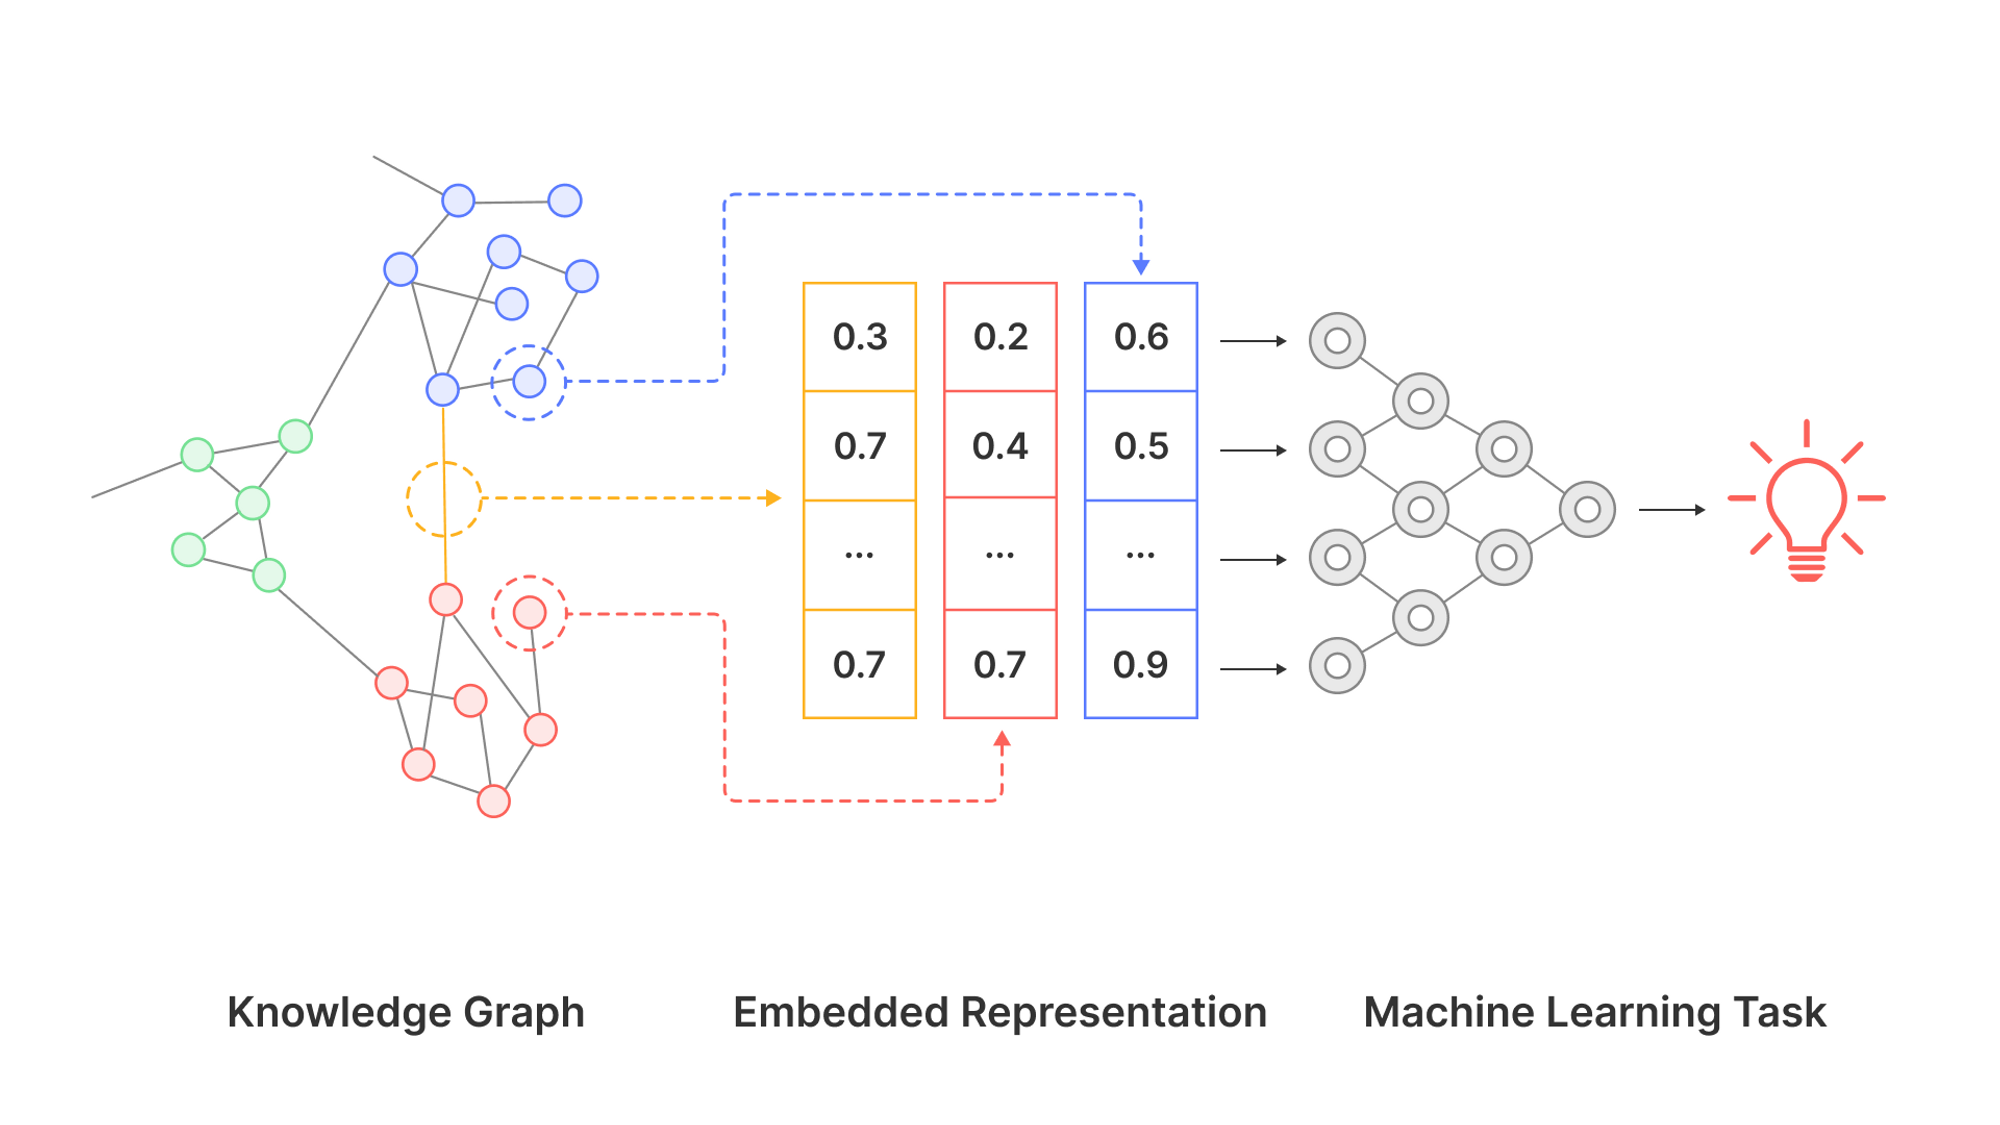 Depiction of knowledge graphs used in computer vision tools.